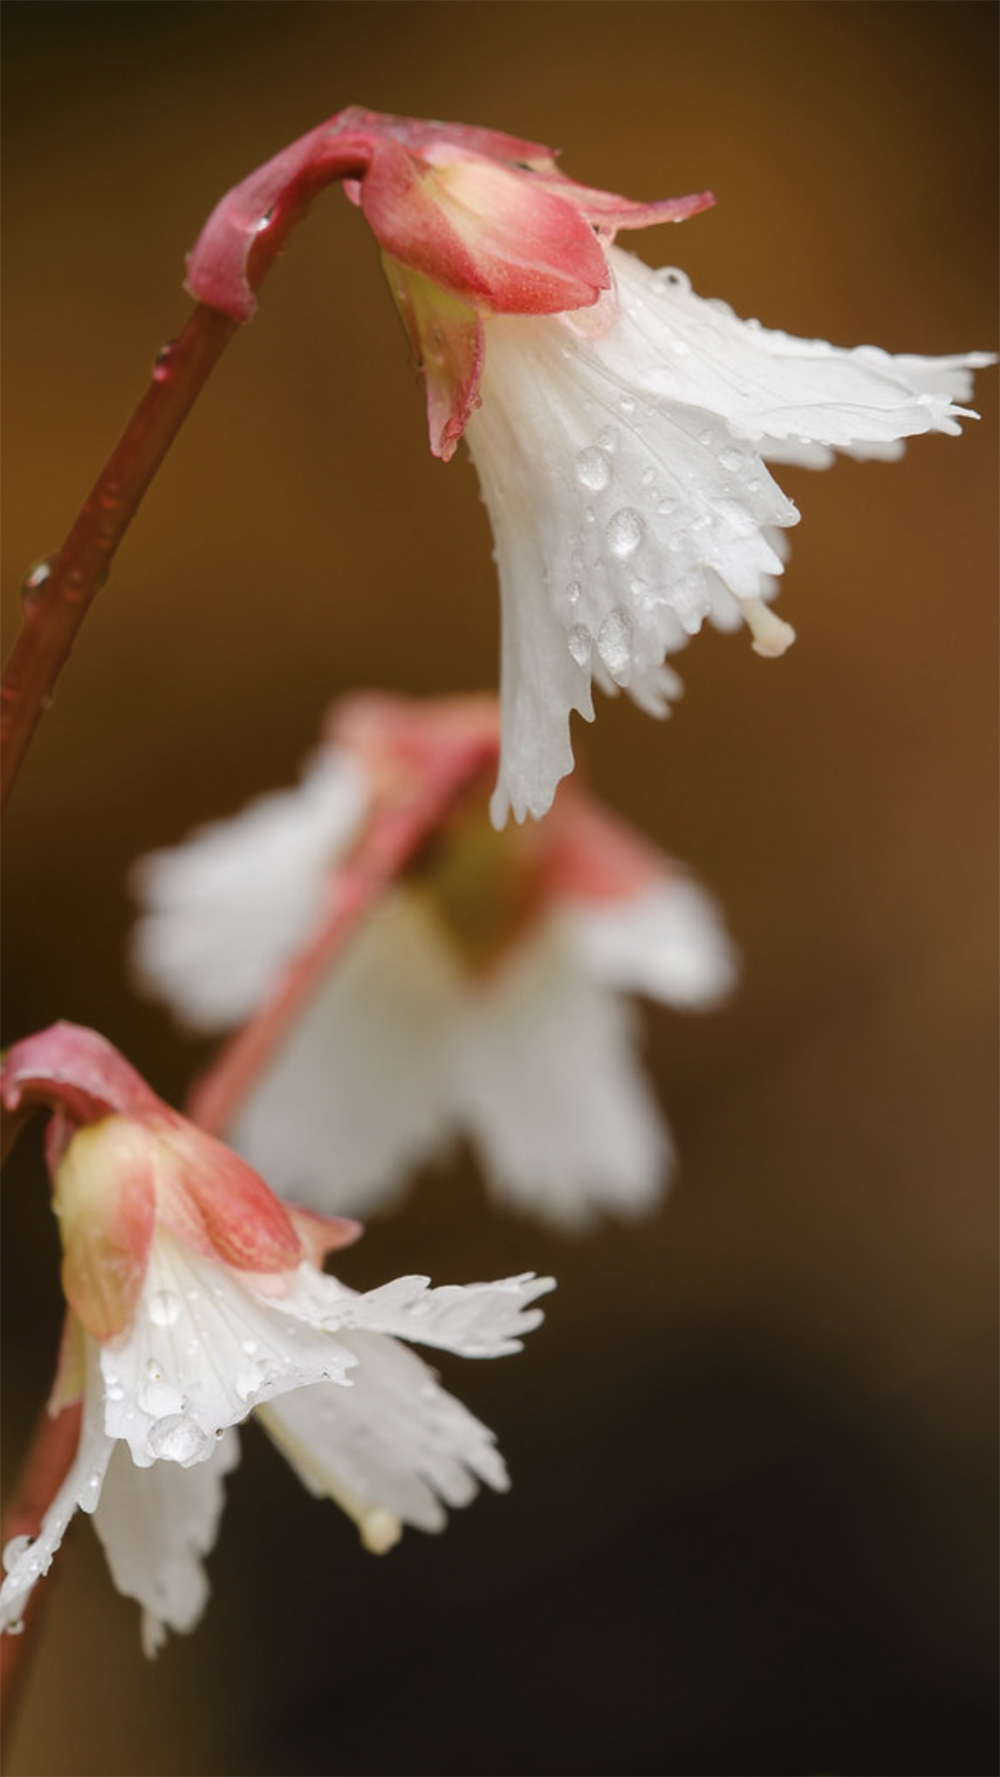 A delicate white bell-shaped flower.